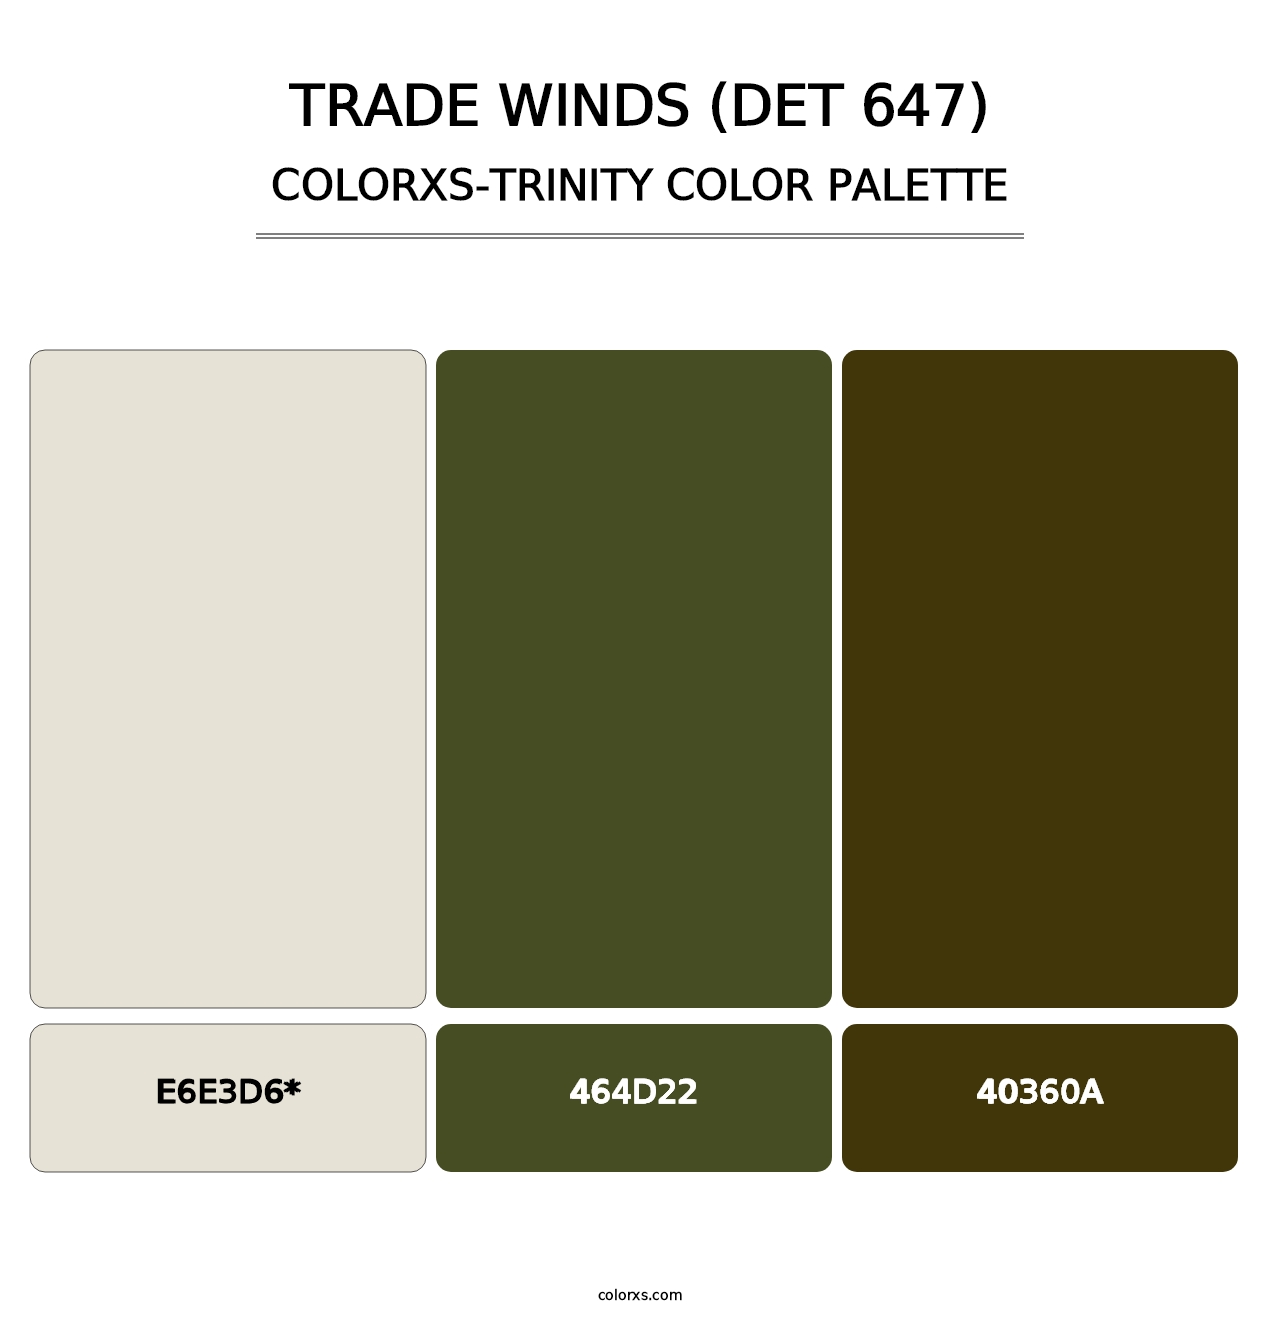 Trade Winds (DET 647) - Colorxs Trinity Palette